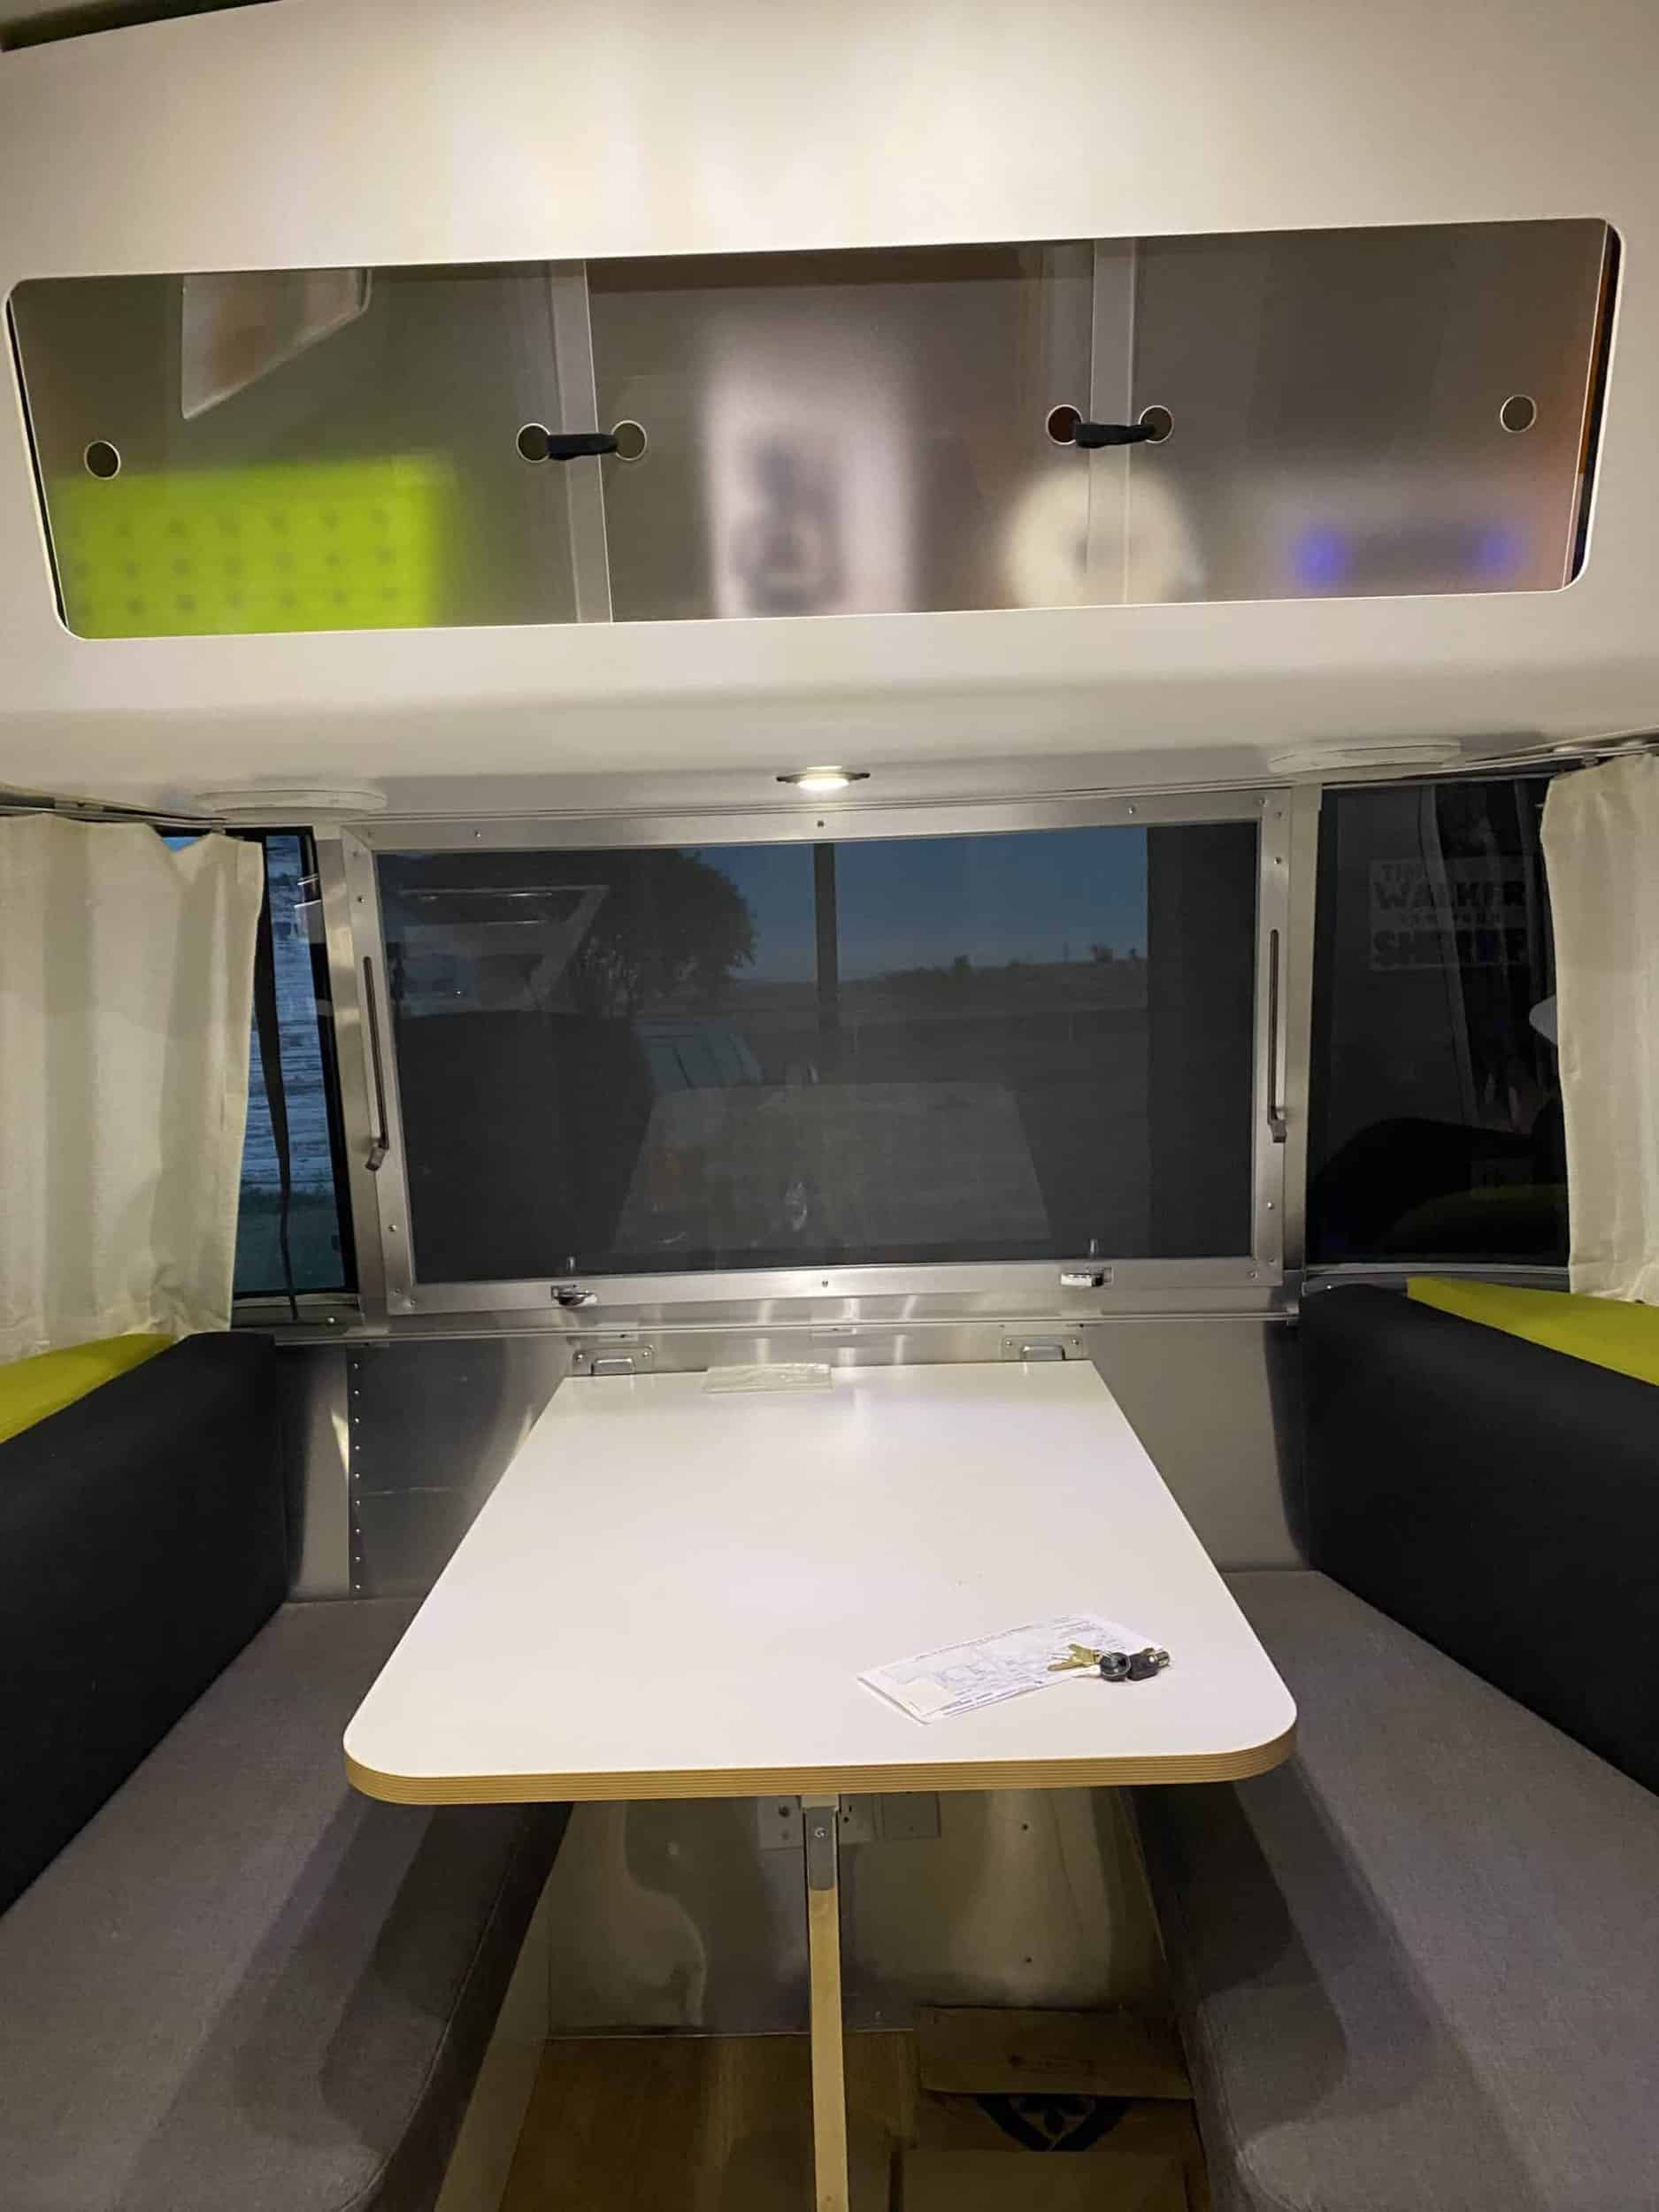 2004 Airstream 16FT Bambi For Sale in Denver - Airstream Marketplace